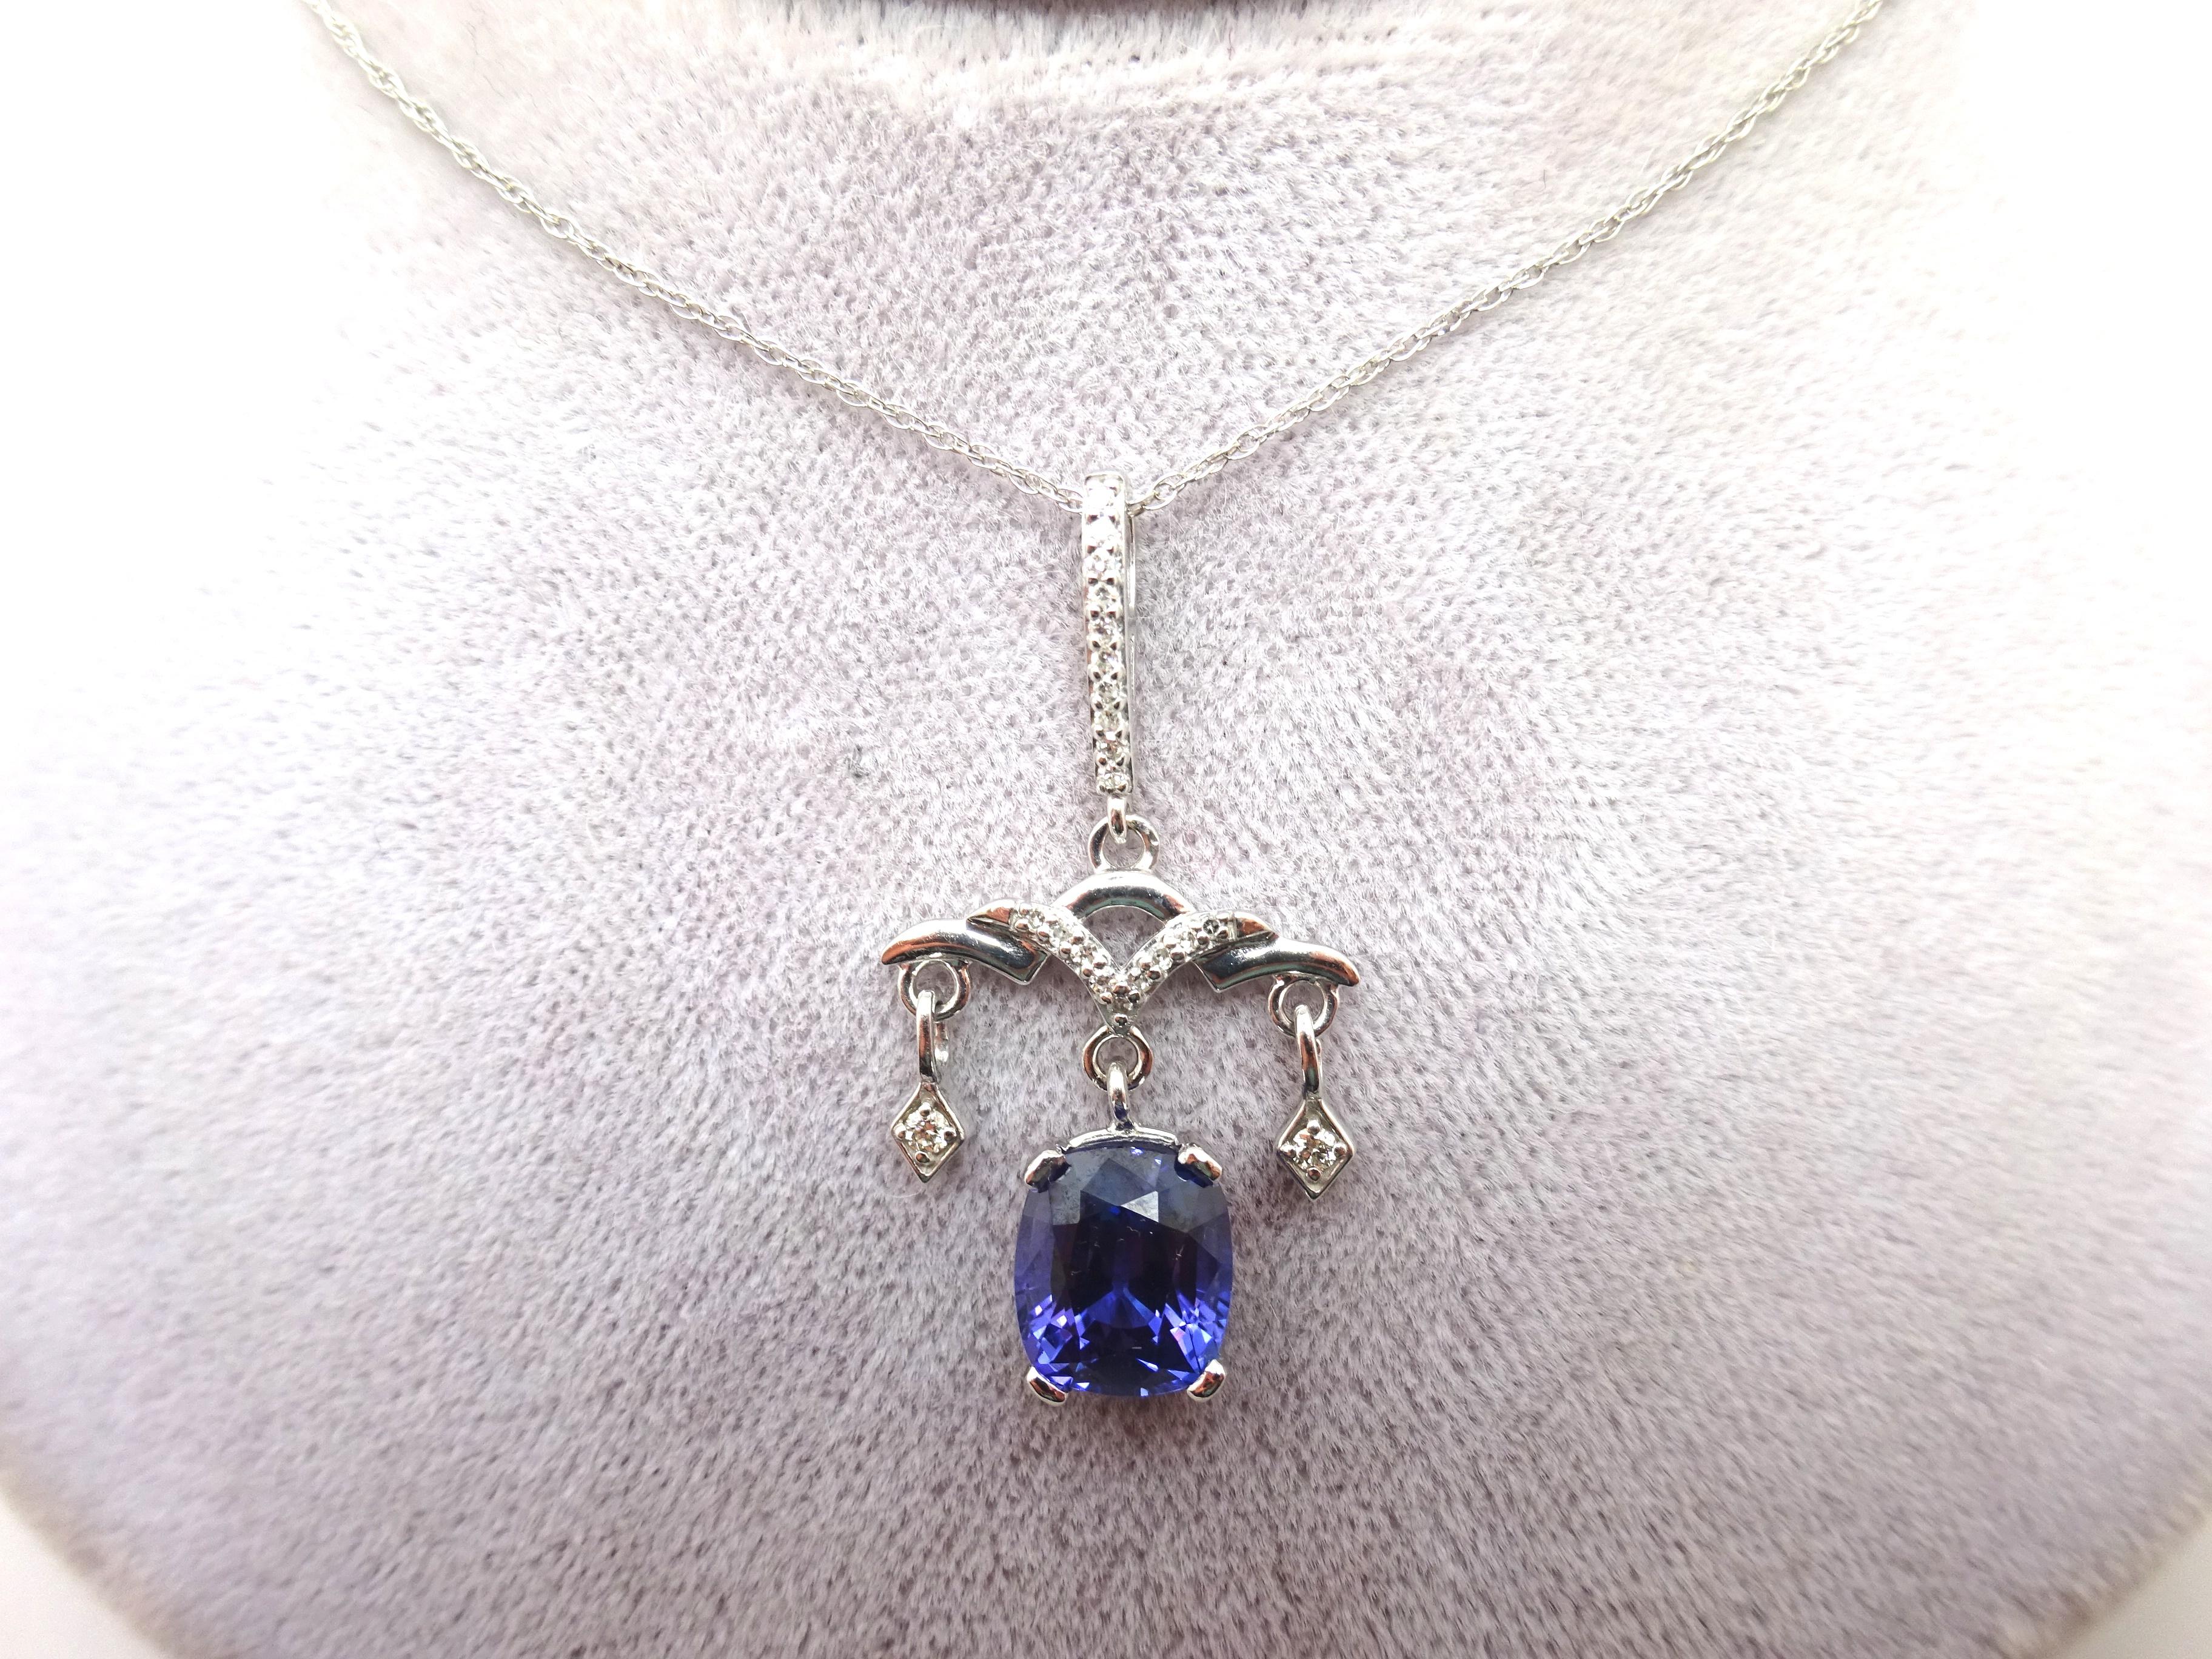 14k Gold Chandelier 2.30ct Genuine Natural Tanzanite Pendant w/Diamonds (#C3757)

Enticing 14k white gold pendant featuring a gorgeous tanzanite and diamonds in a chandelier style. The tanzanite is oval shaped weighting approximately 2.30 carats and